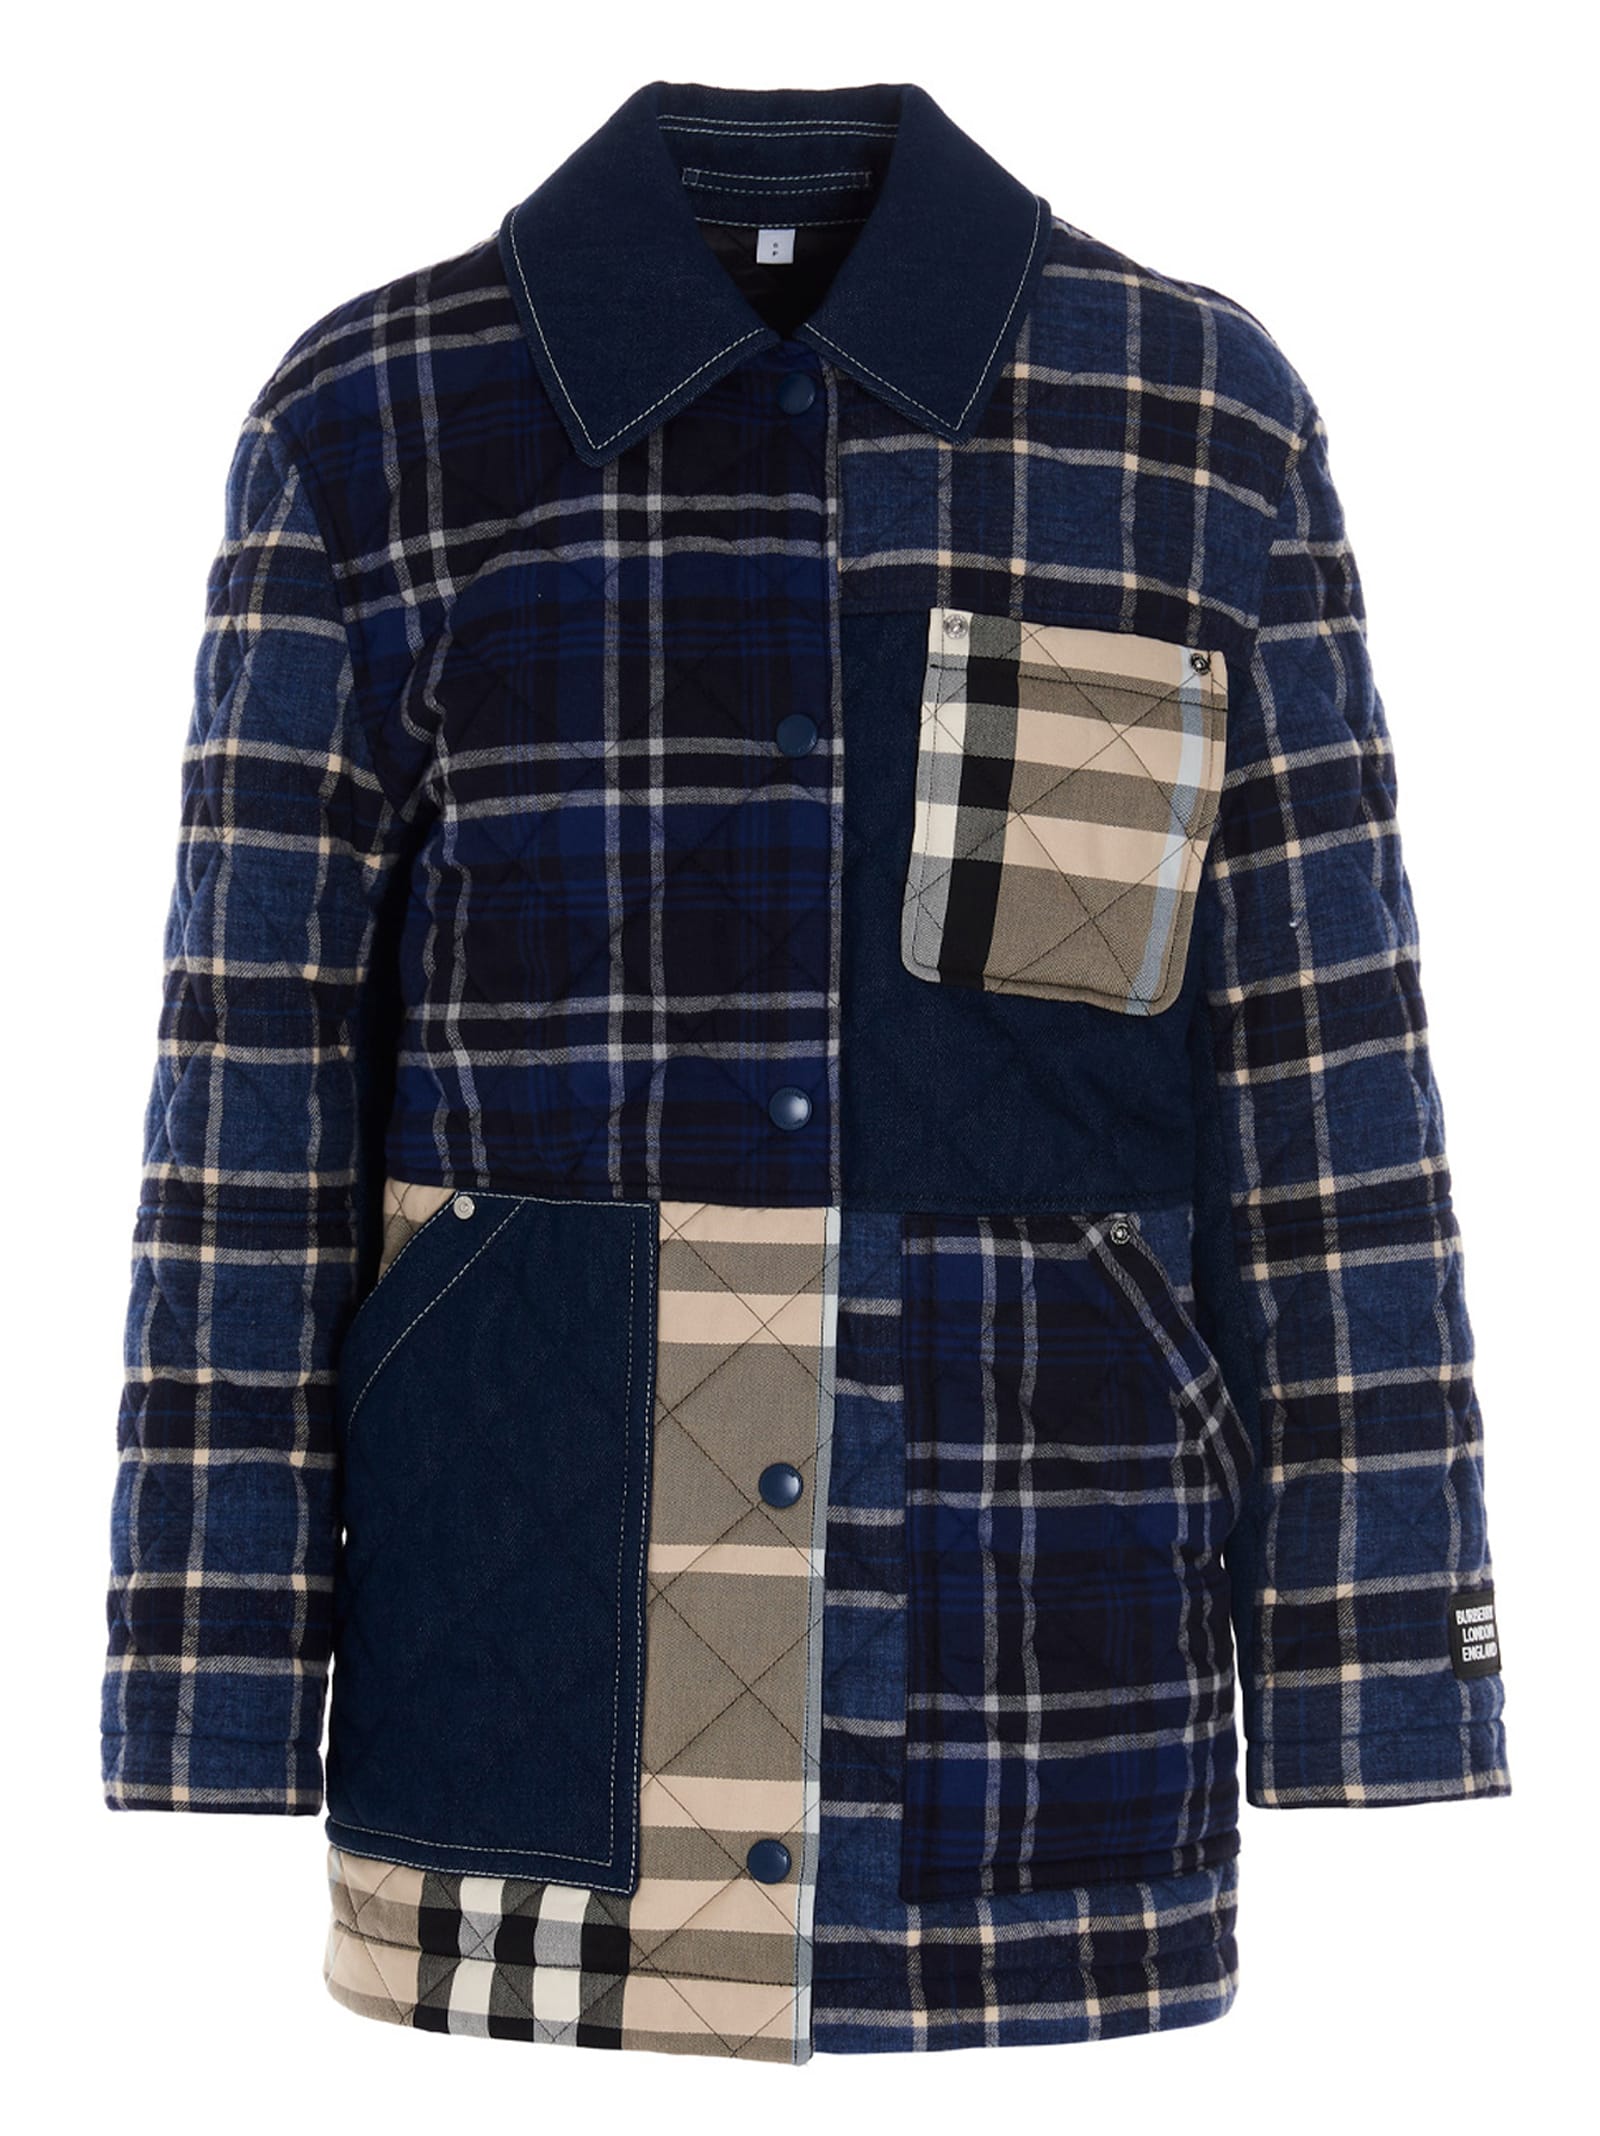 Burberry dunsby Jacket